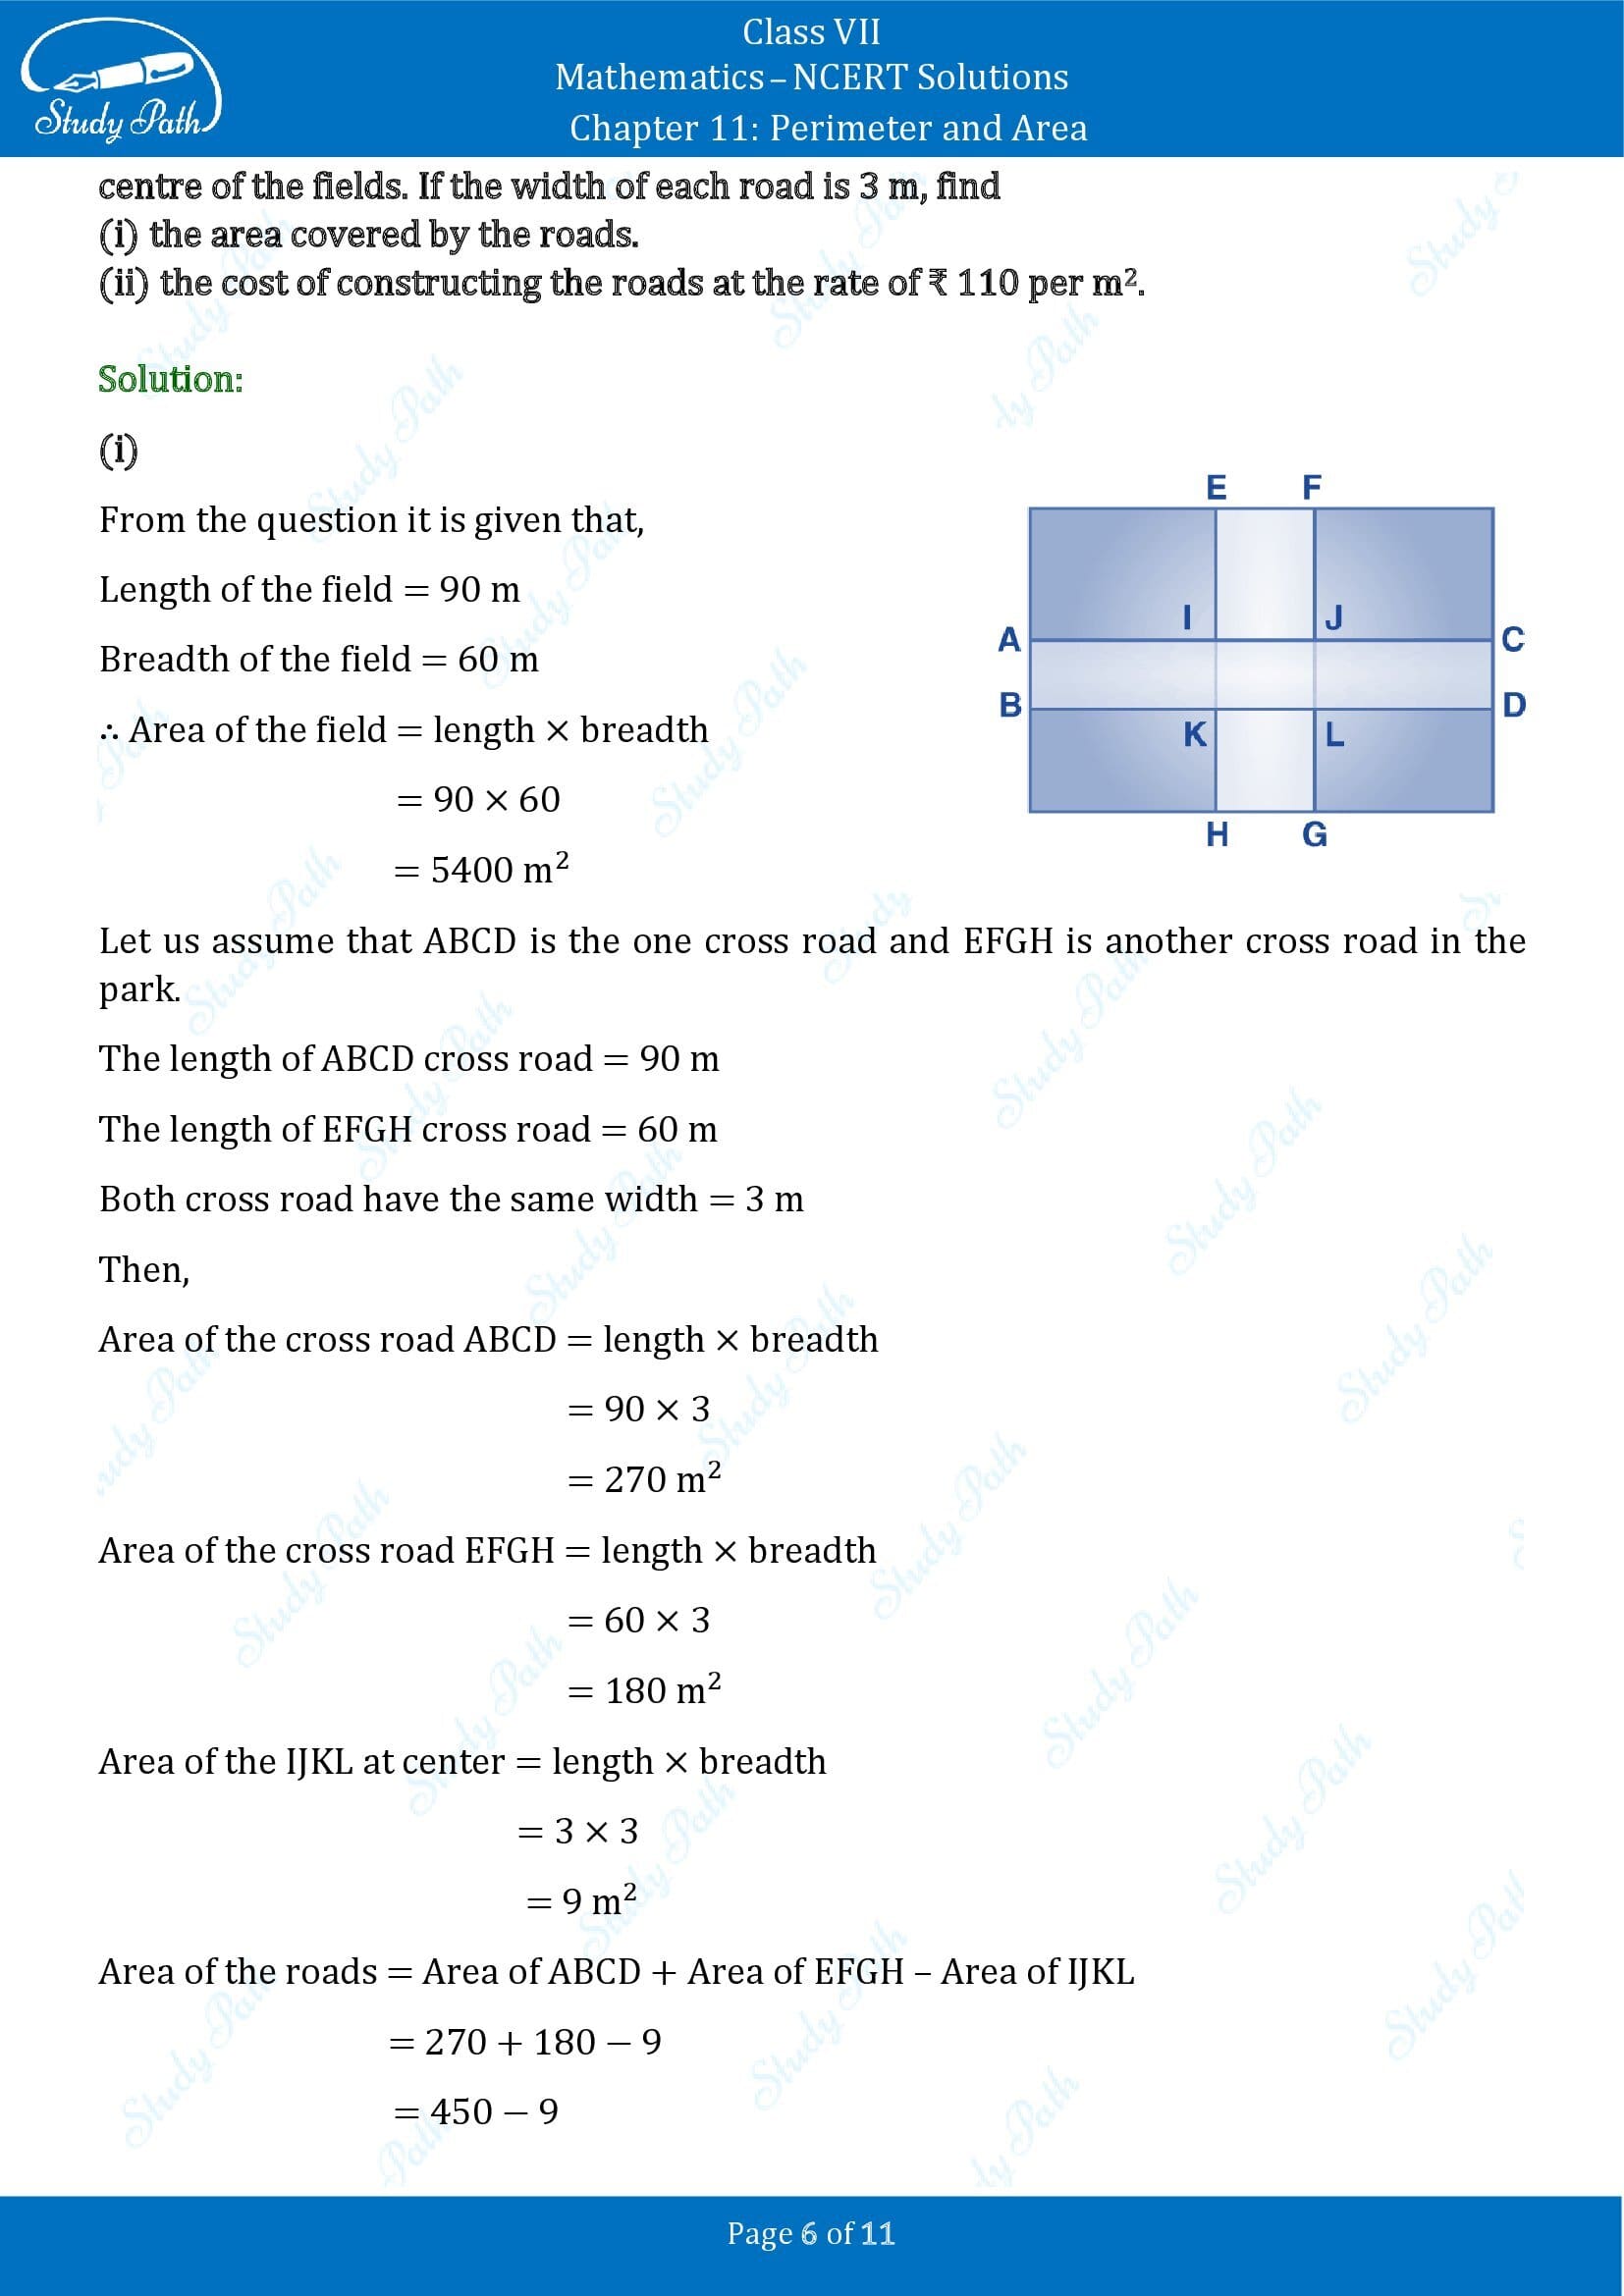 NCERT Solutions for Class 7 Maths Chapter 11 Perimeter and Area Exercise 11.4 00006